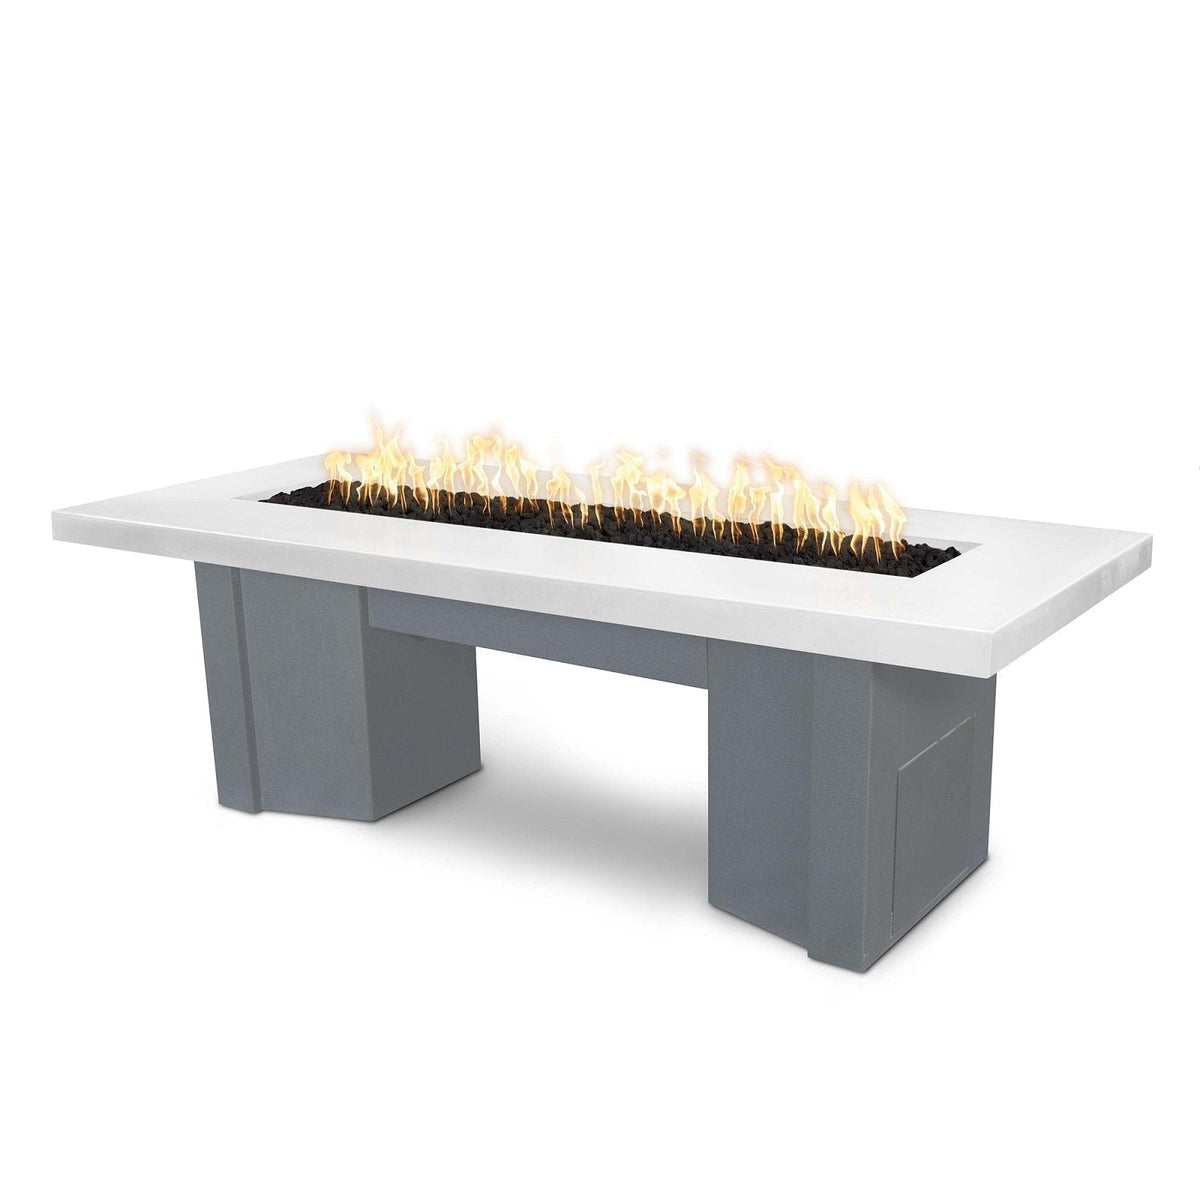 The Outdoor Plus Fire Features Limestone (-LIM) / Gray Powder Coated Steel (-GRY) The Outdoor Plus 78&quot; Alameda Fire Table Smooth Concrete in Liquid Propane - 110V Plug &amp; Play Electronic Ignition / OPT-ALMGFRC78EKIT-LP